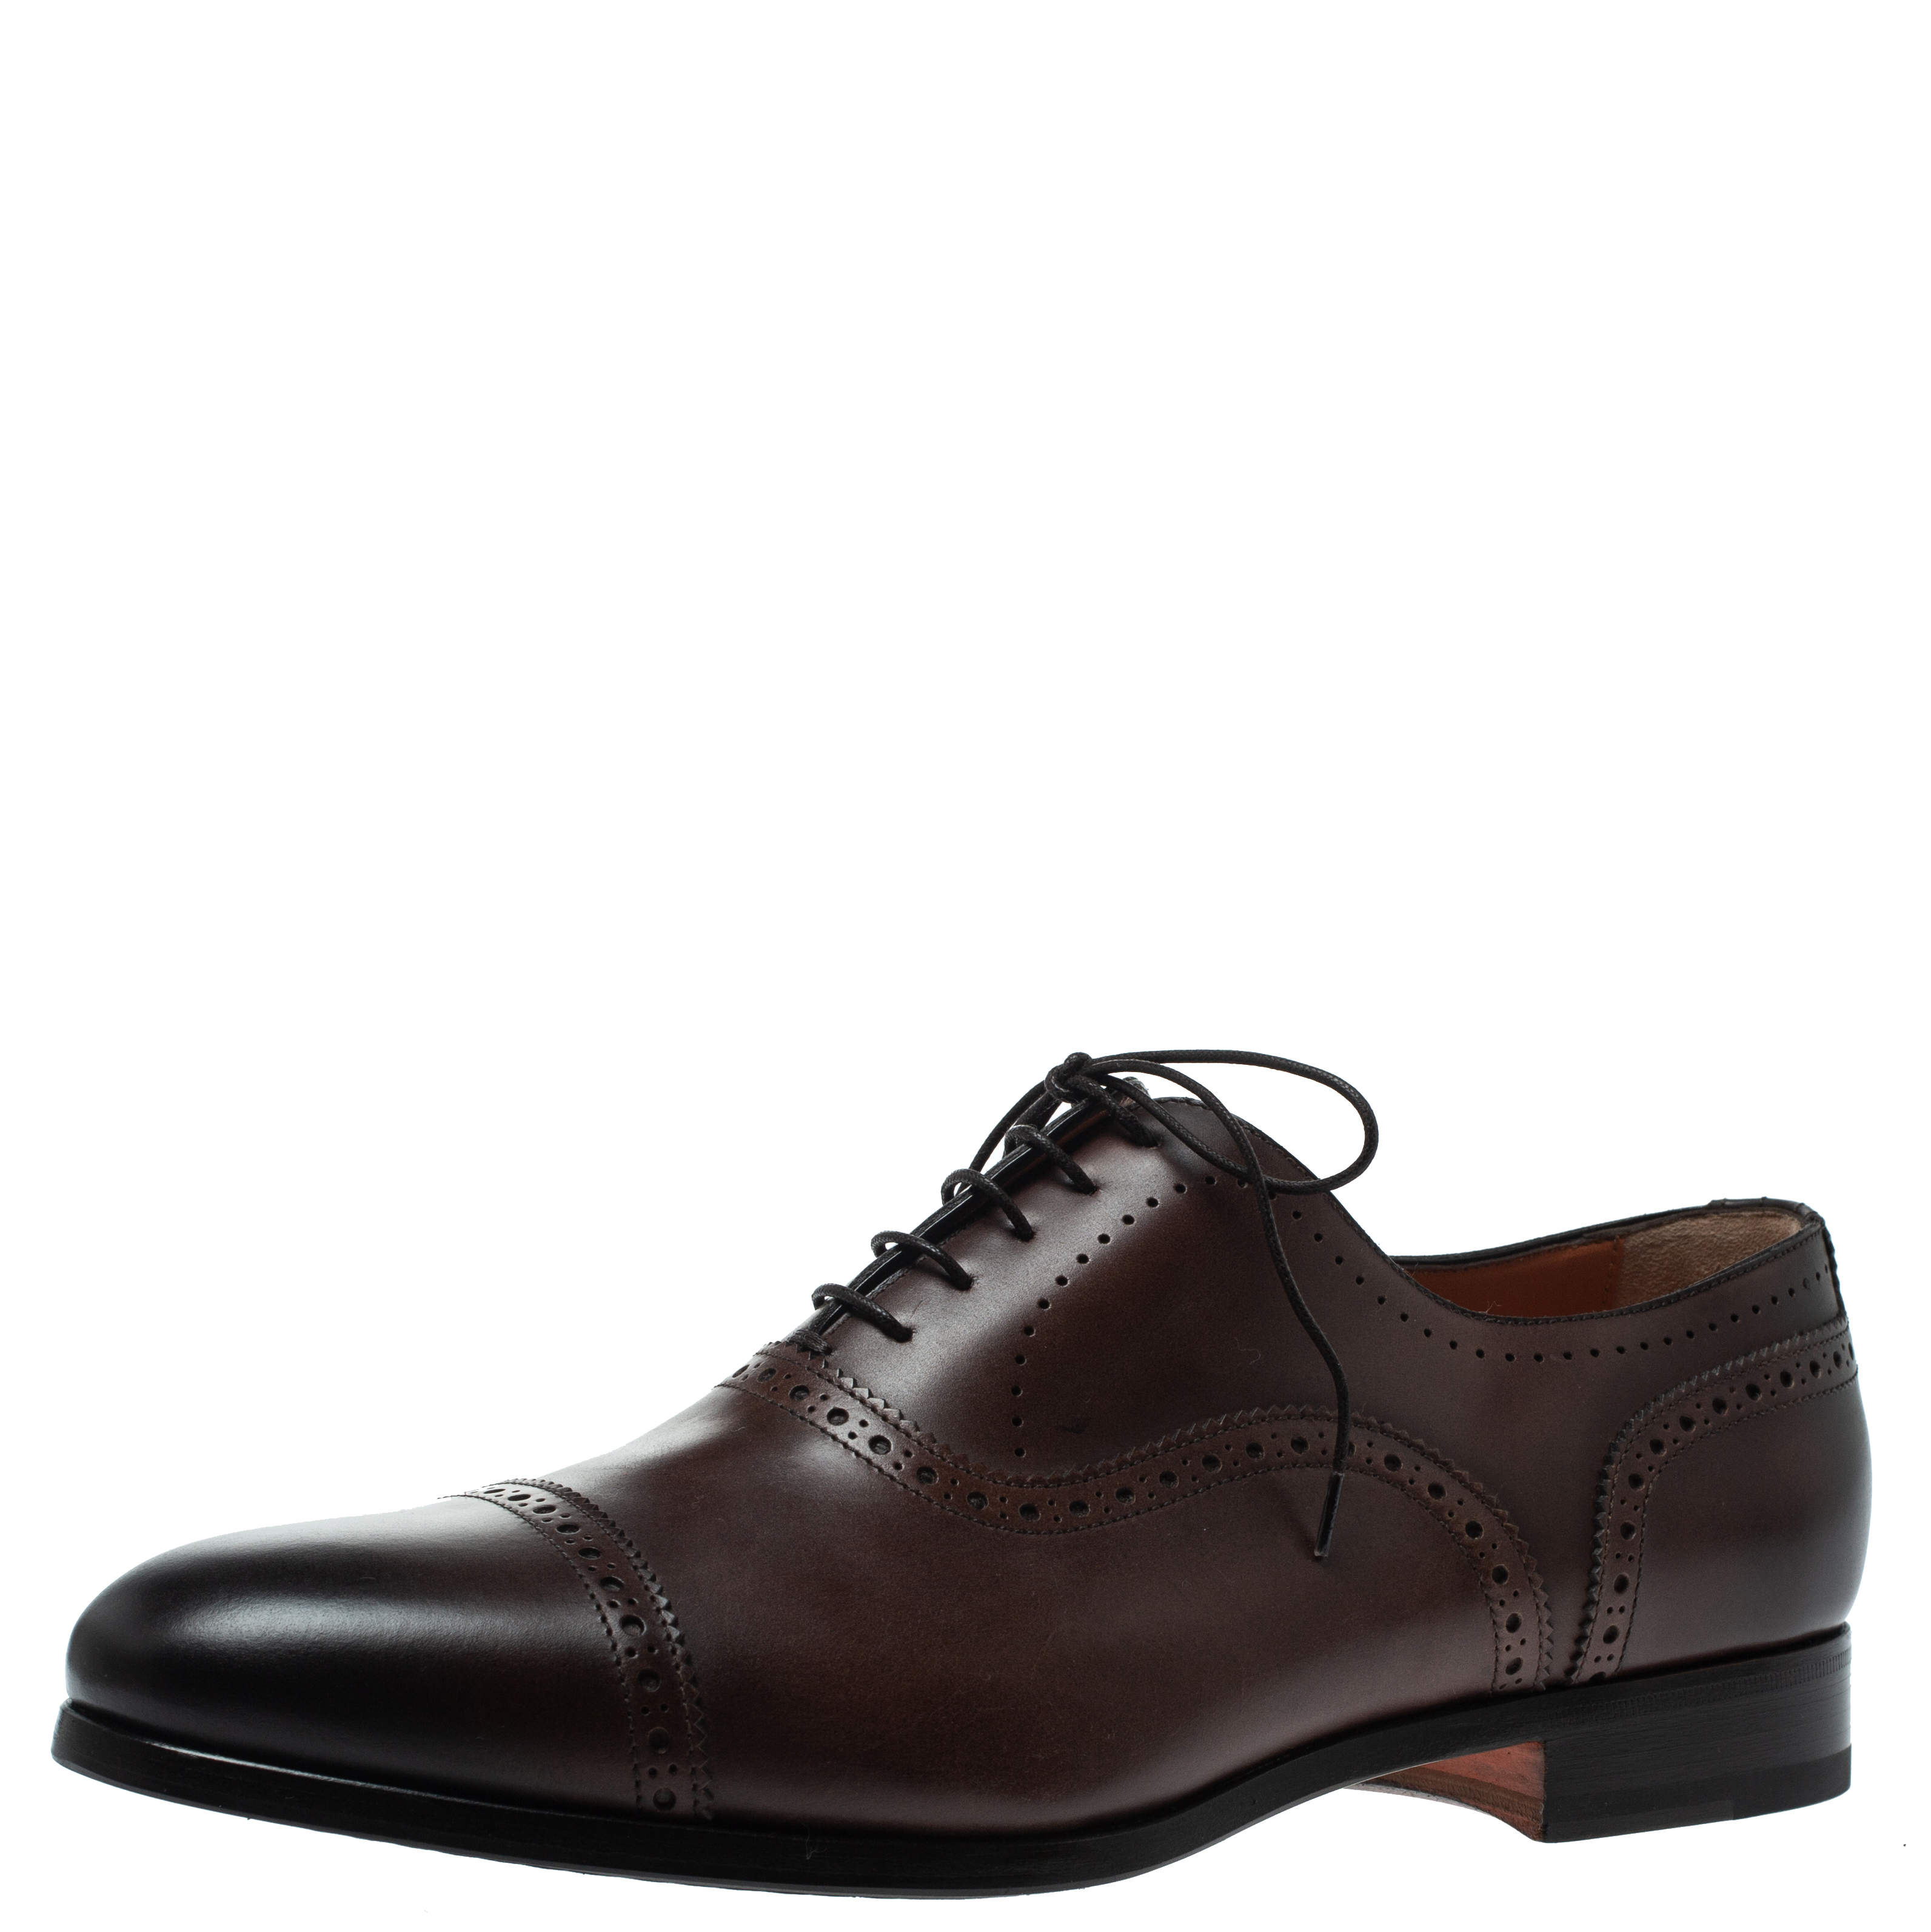 Santoni Brown Brogue Leather Lace Up Oxford Size 43